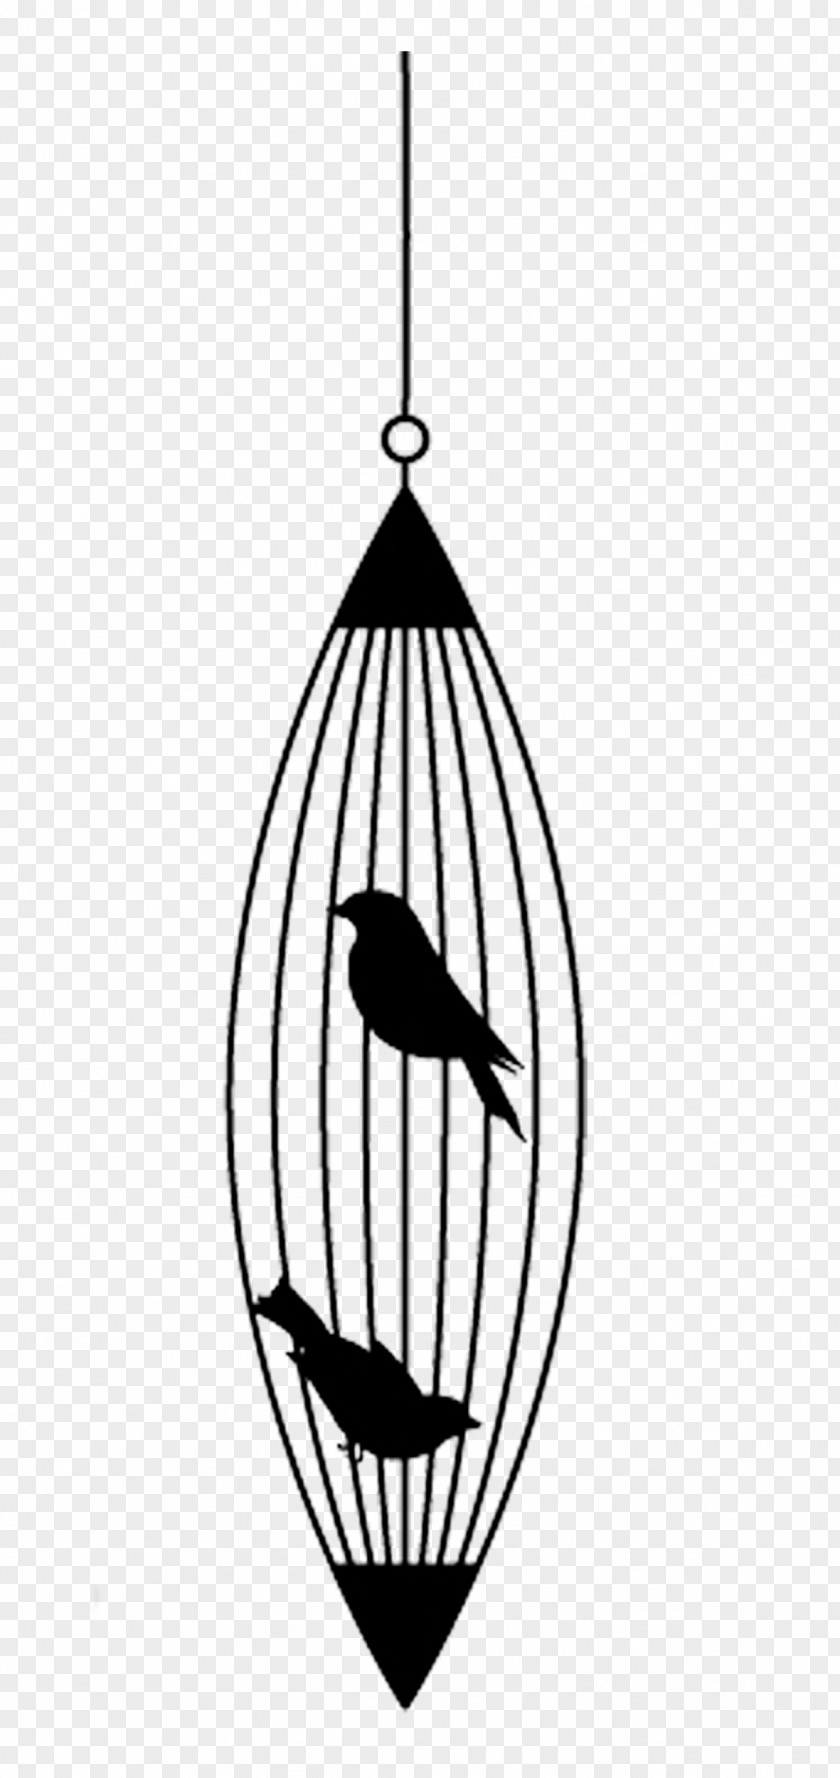 Oval Bird Cage PNG